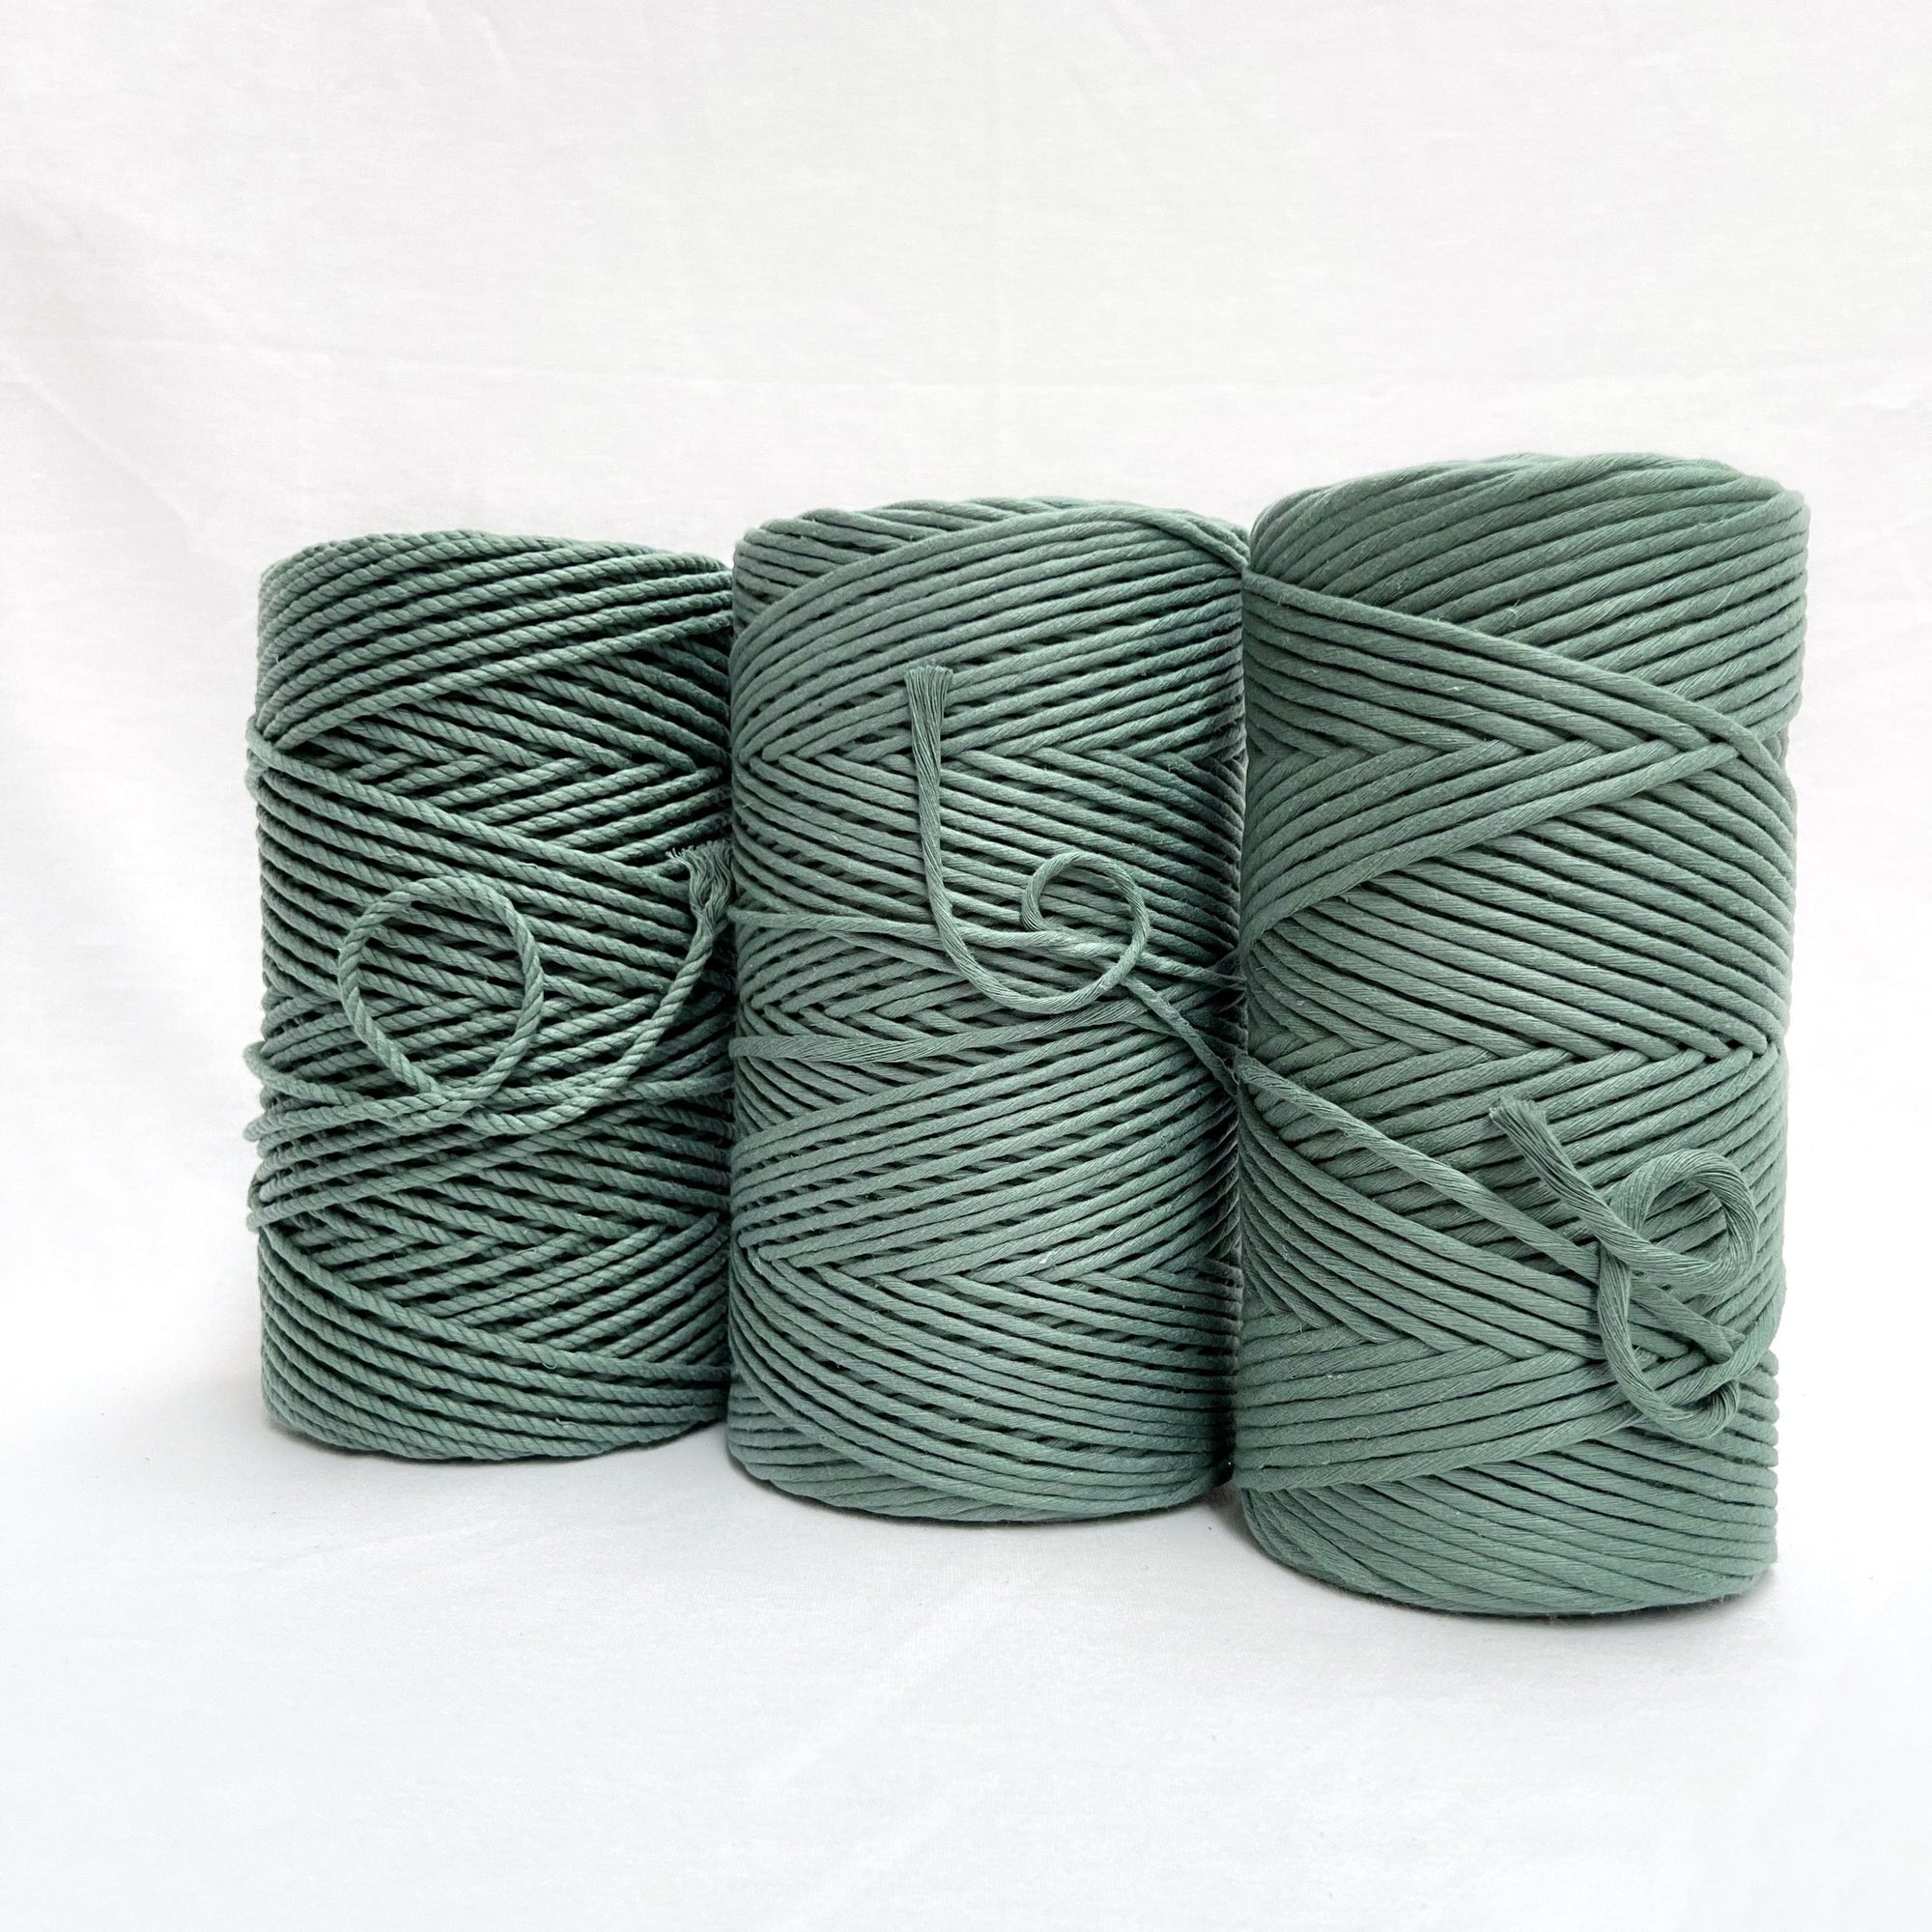 mary maker studio 1kg 4mm recycled cotton macrame rope in deep winter green colour suitable for macrame workshops beginners and advanced artists